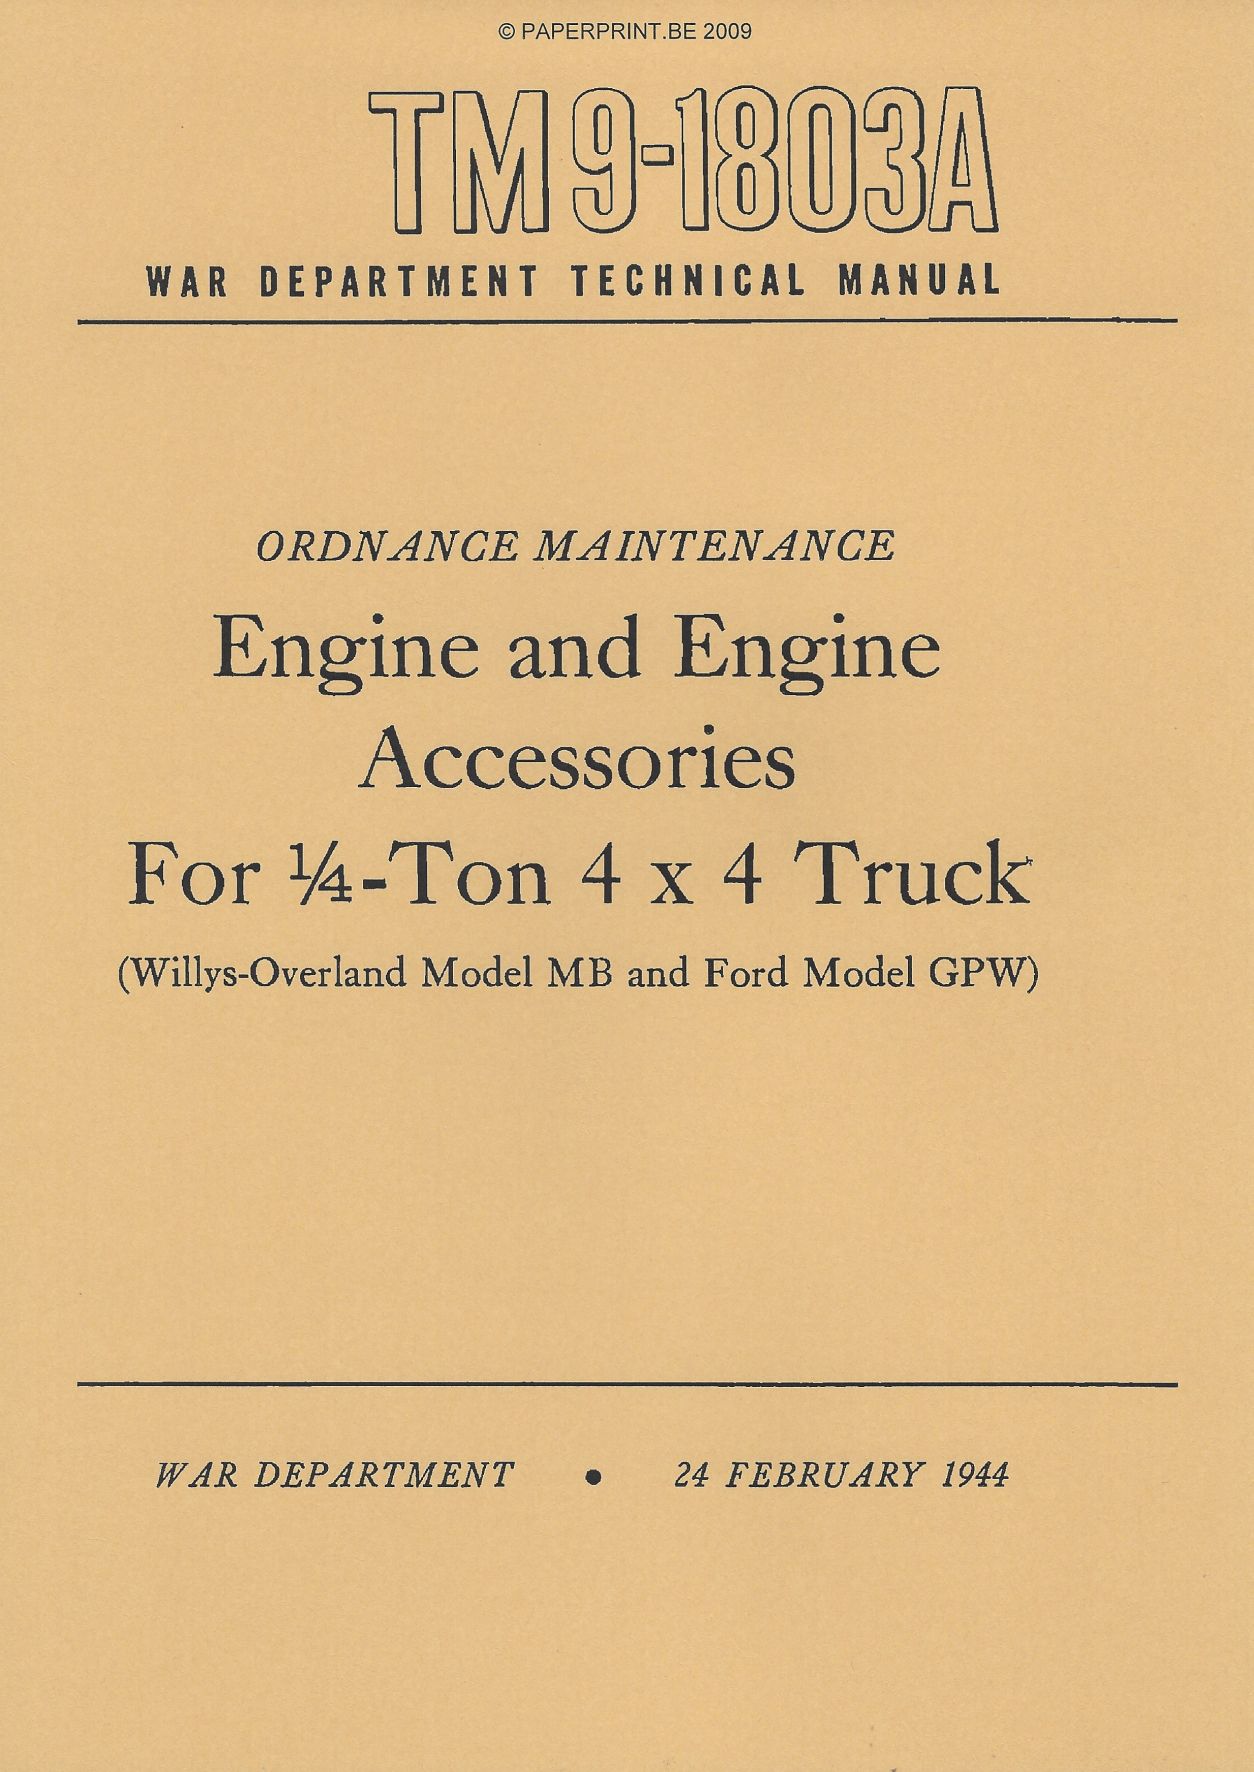 TM 9-1803A US ENGINE AND ENGINE ACCESSORIES FOR ¼ - TON 4x4 TRUCK